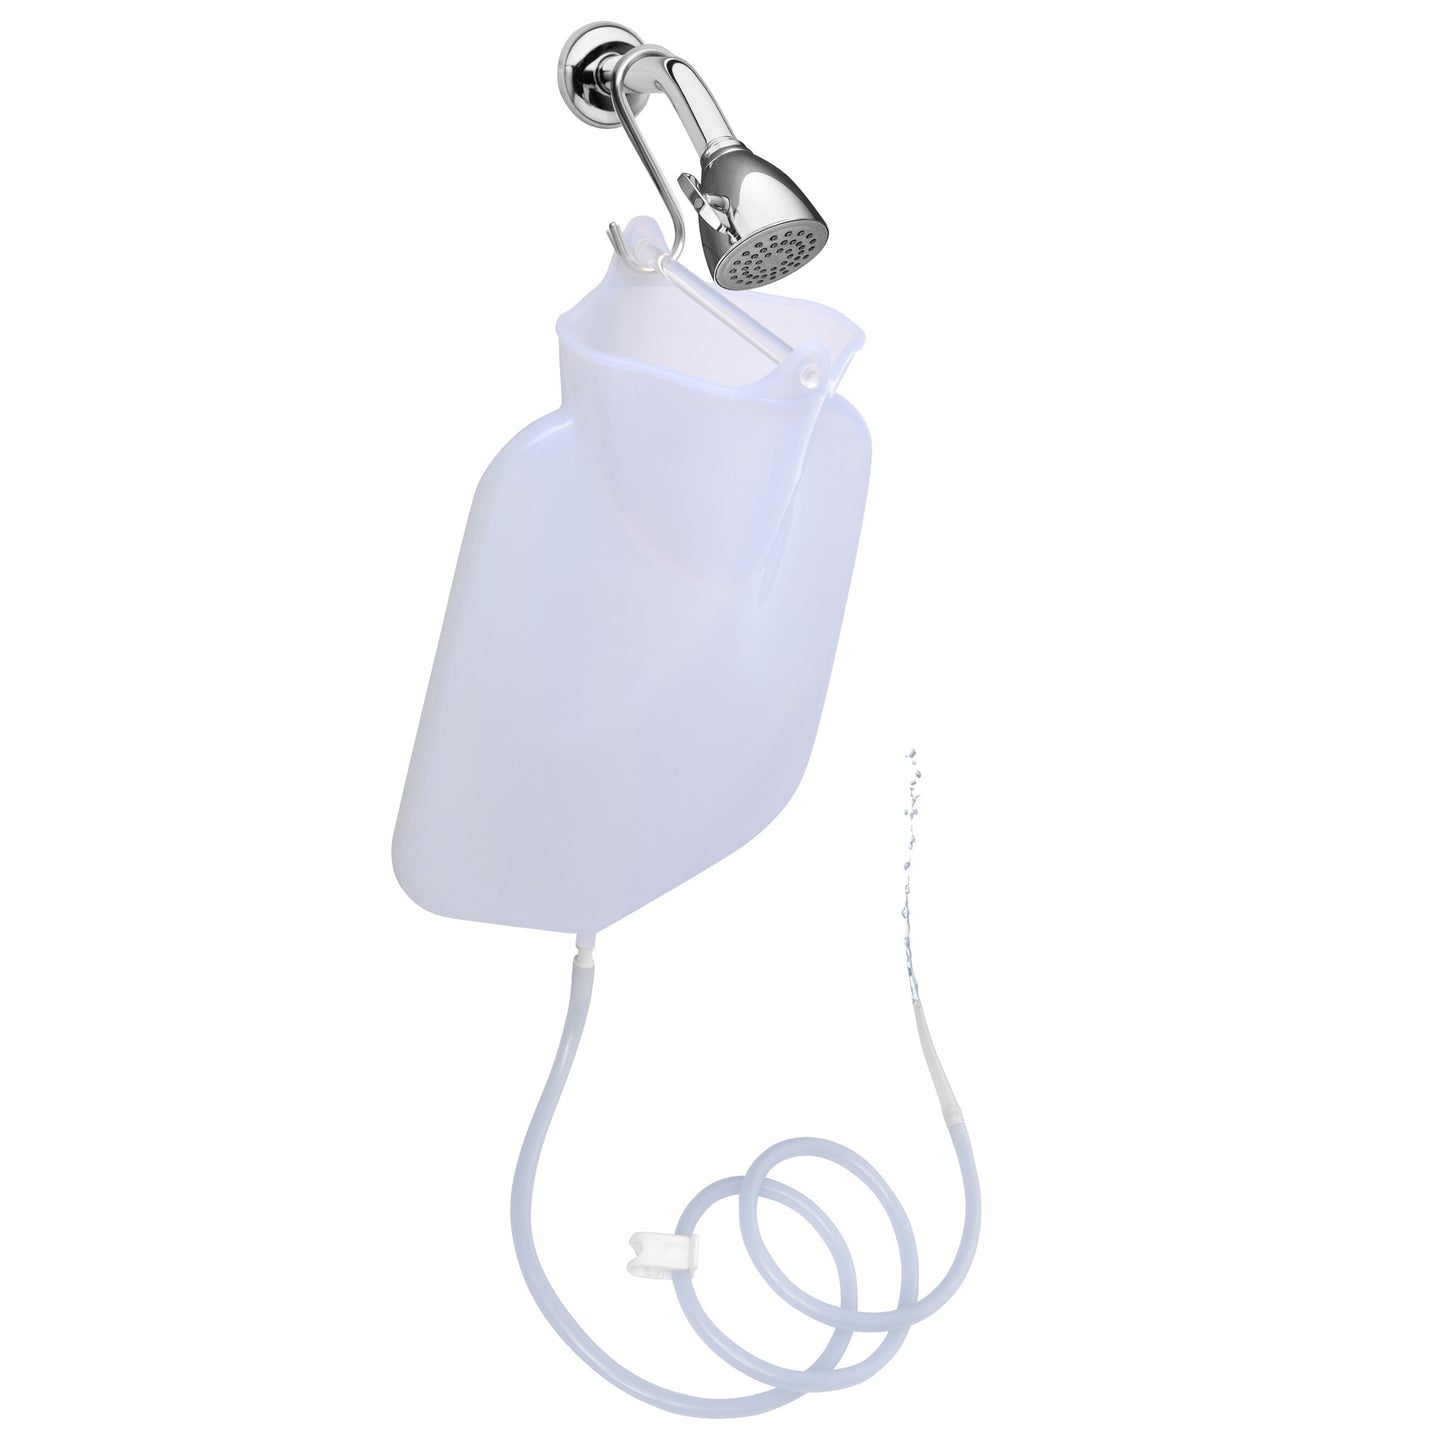 CleanStream Silicone Shower Cleansing System - UABDSM